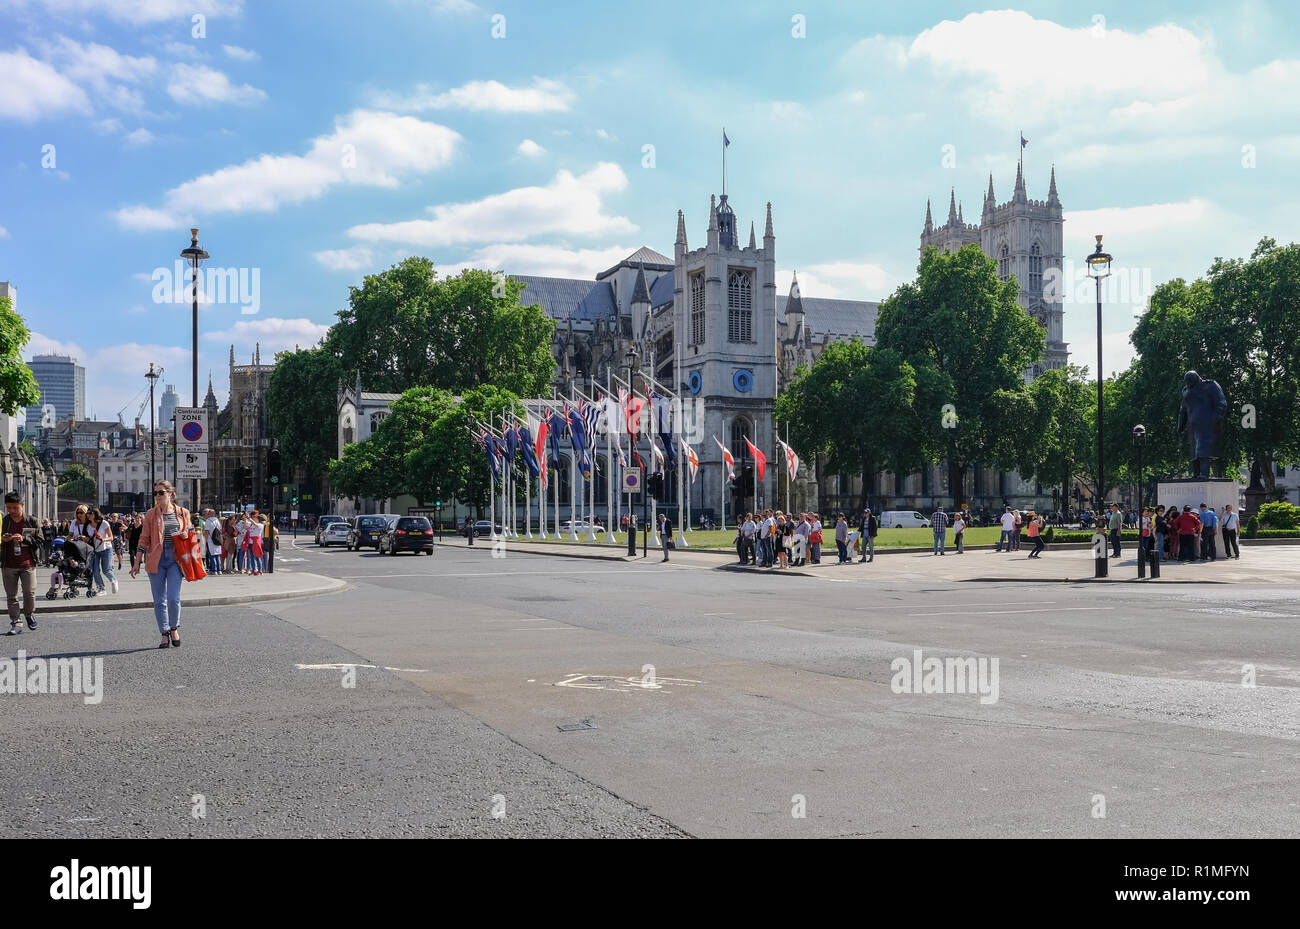 Westminster, Lonodn, Uk - June 8, 2018: view across the road of Westminster Abbey with people and traffic, making a street scene.  Summer shot taken i Stock Photo